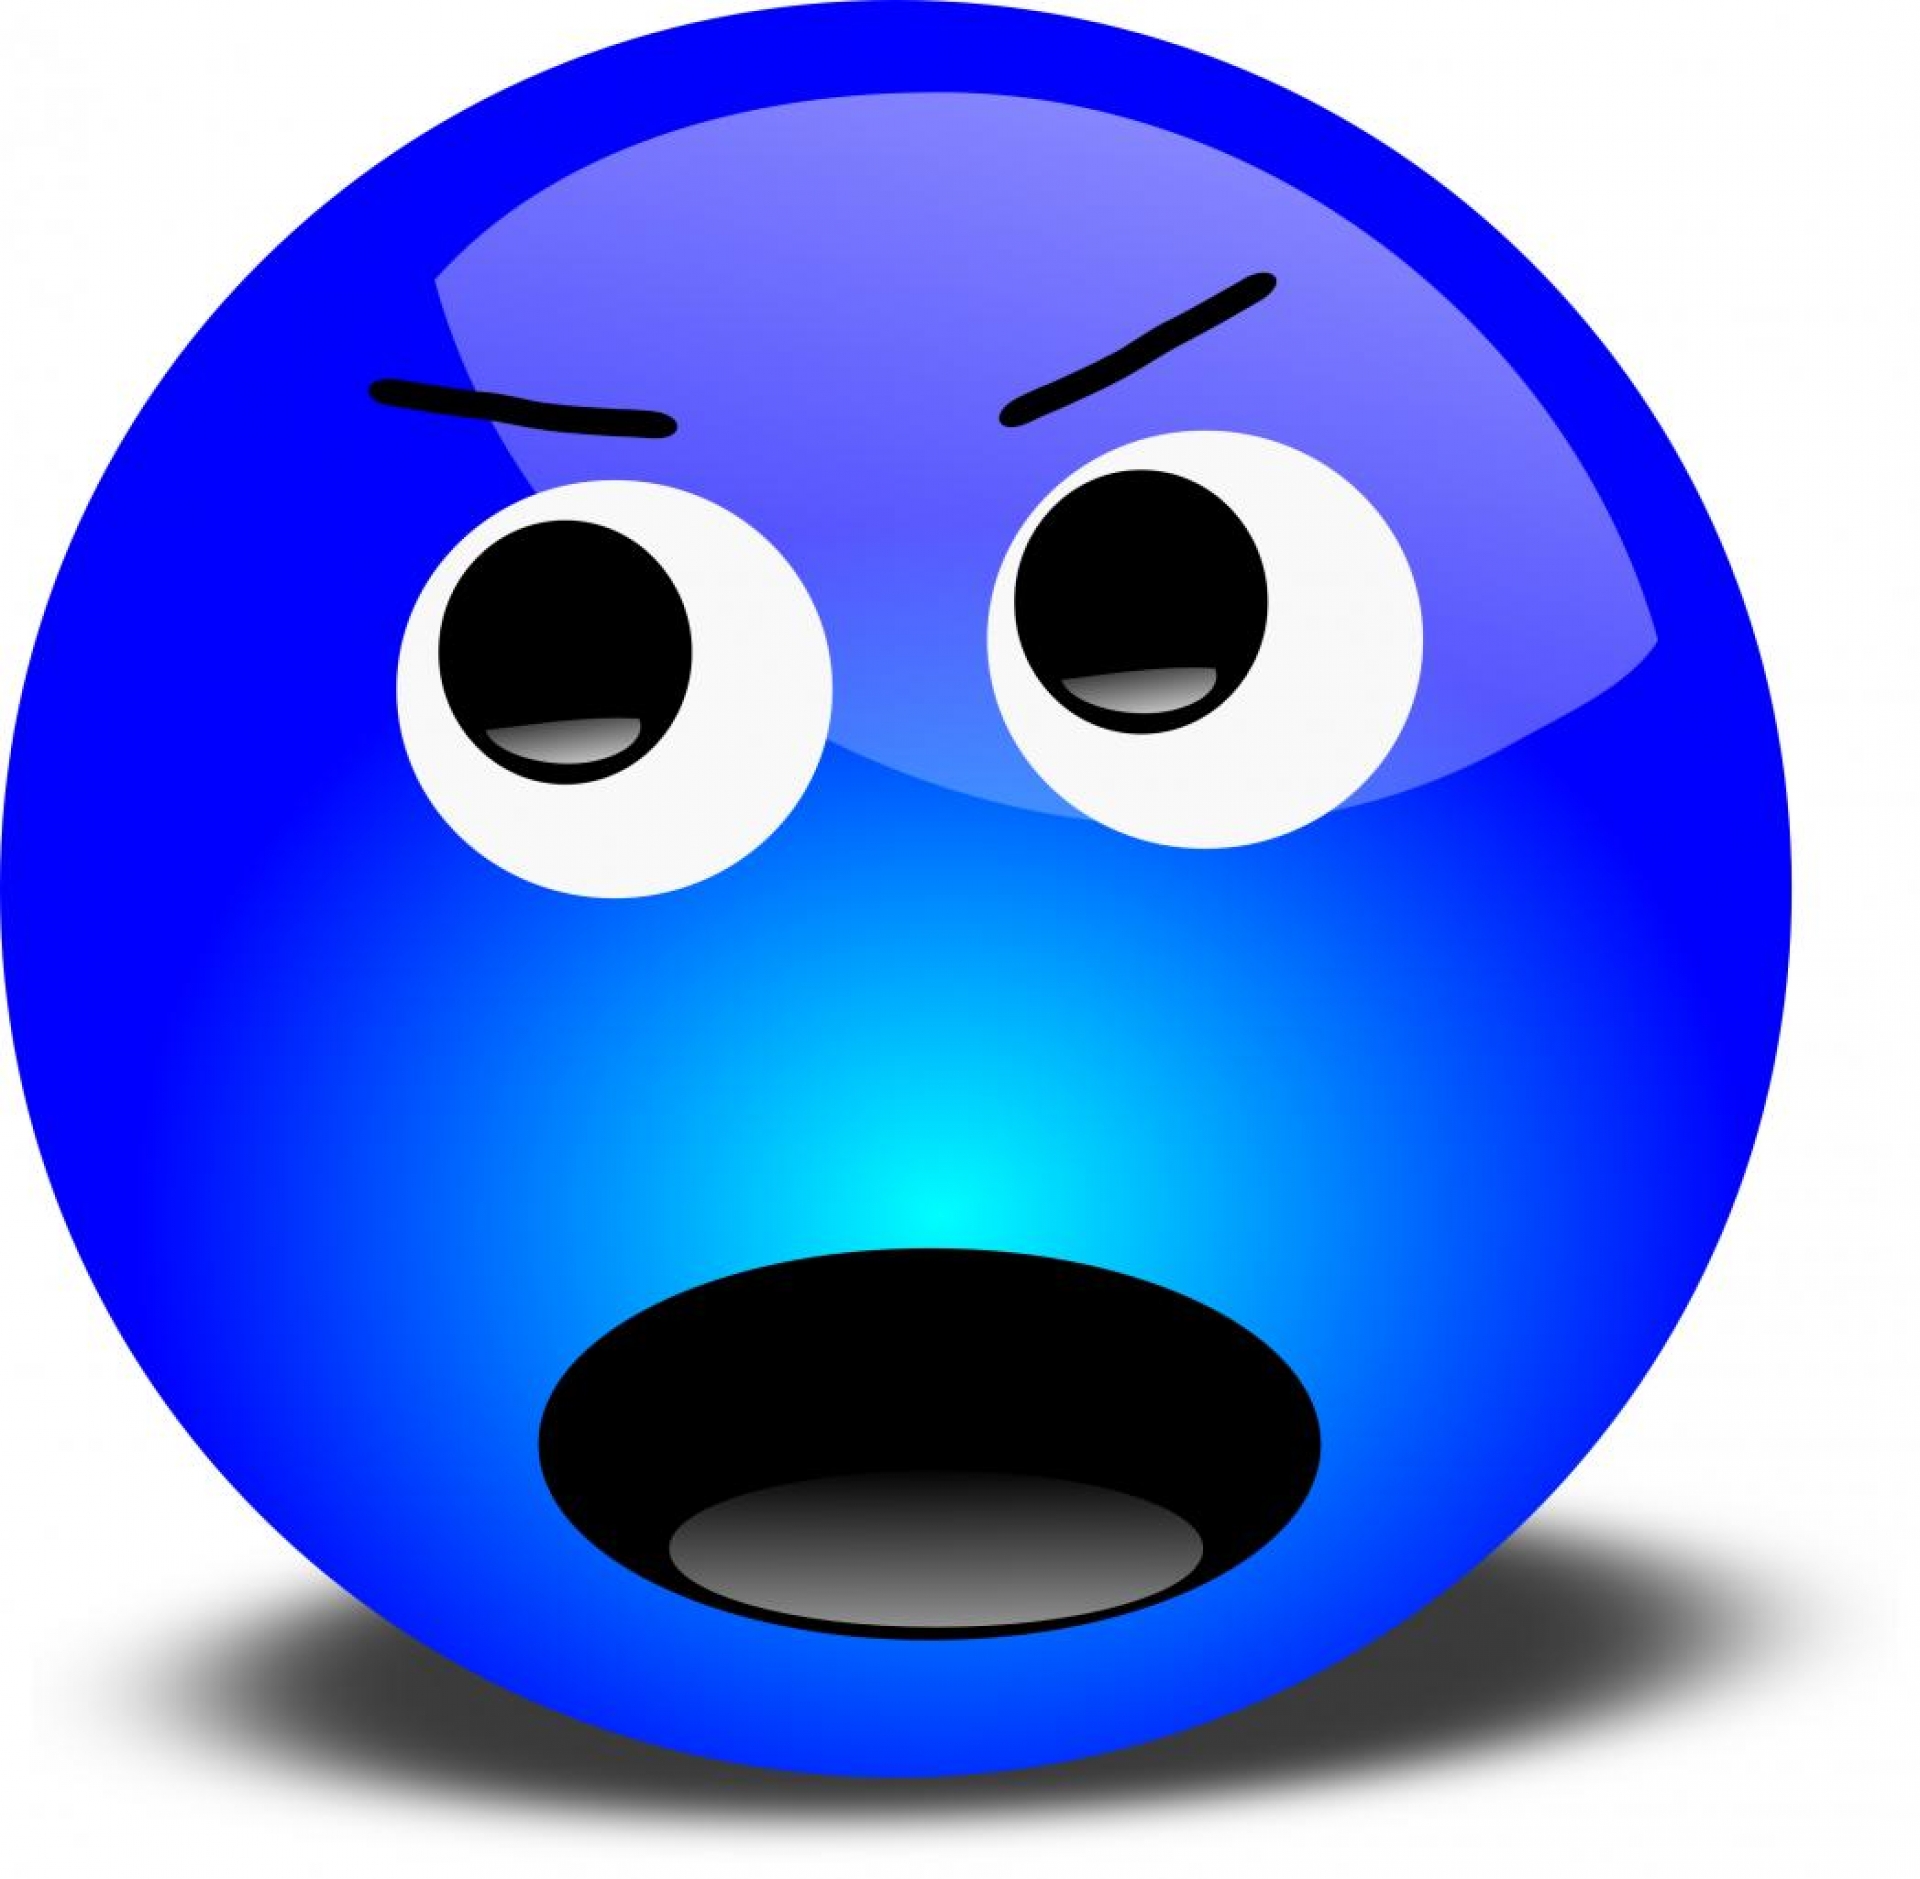 Angry Face Cartoon - ClipArt Best